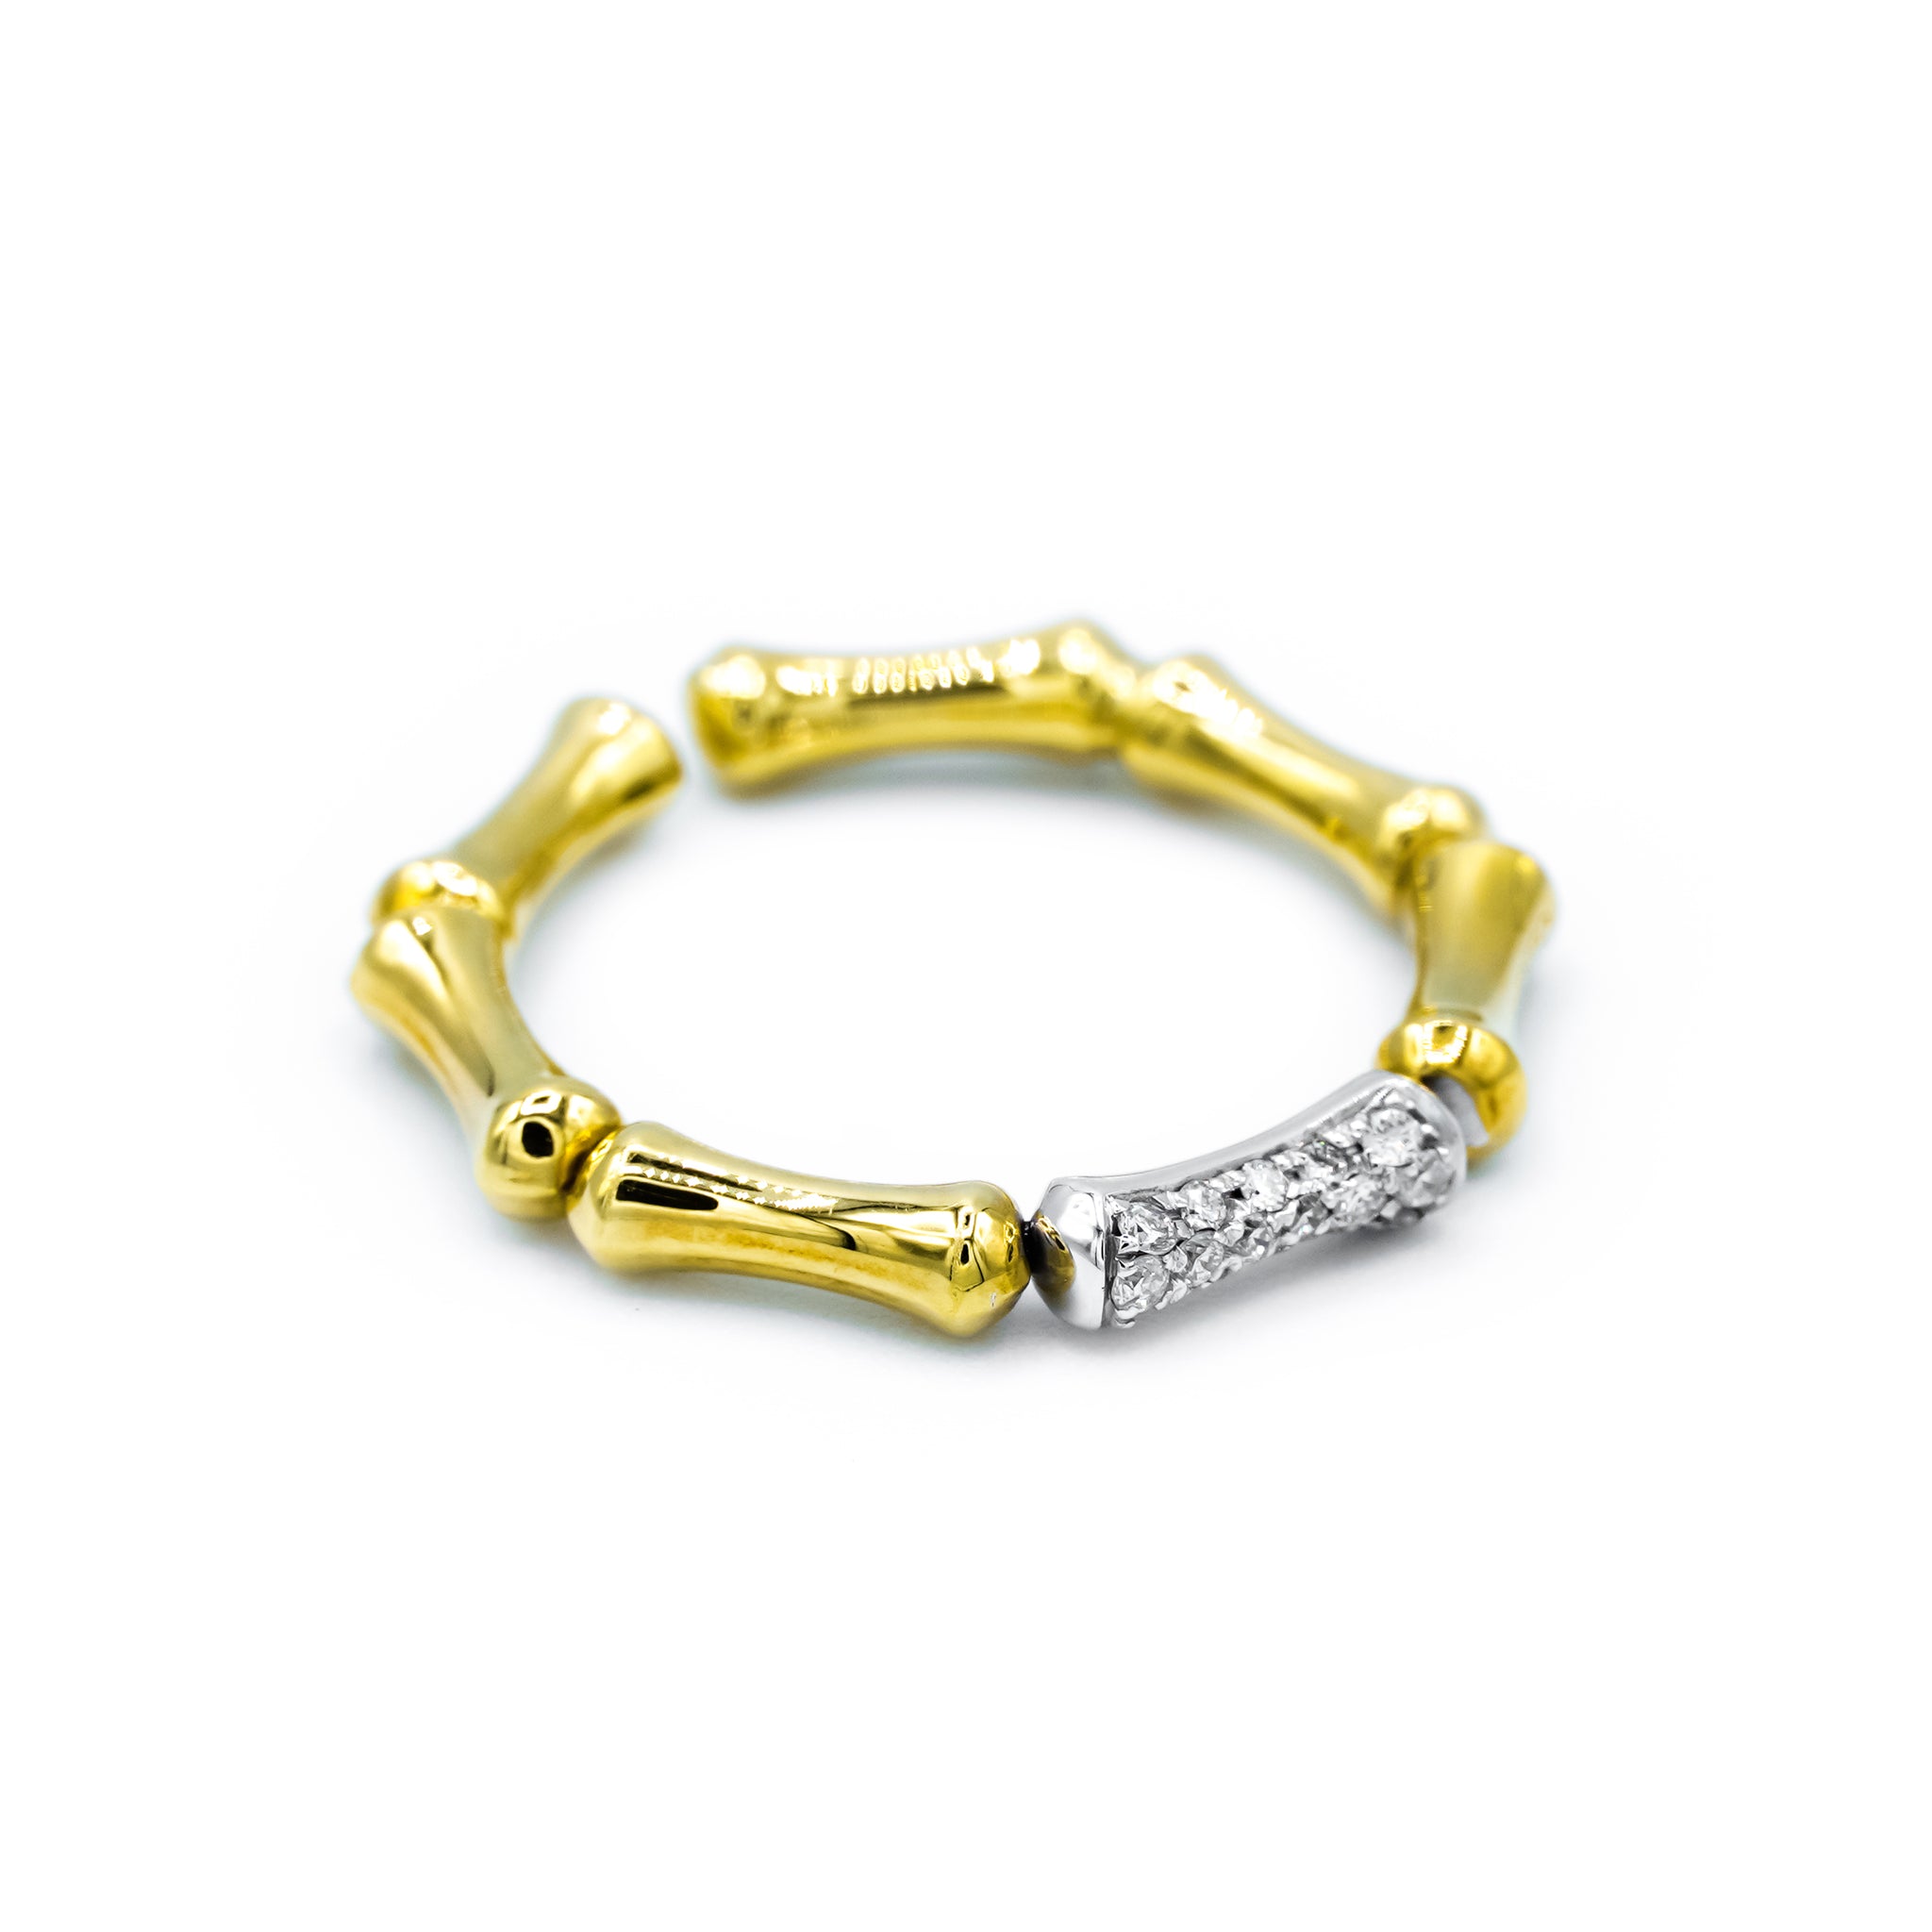 CHIMENTO - BAMBOO REGULAR WHITE AND YELLOW GOLD WITH DIAMONDS RING 1A05852BB2140